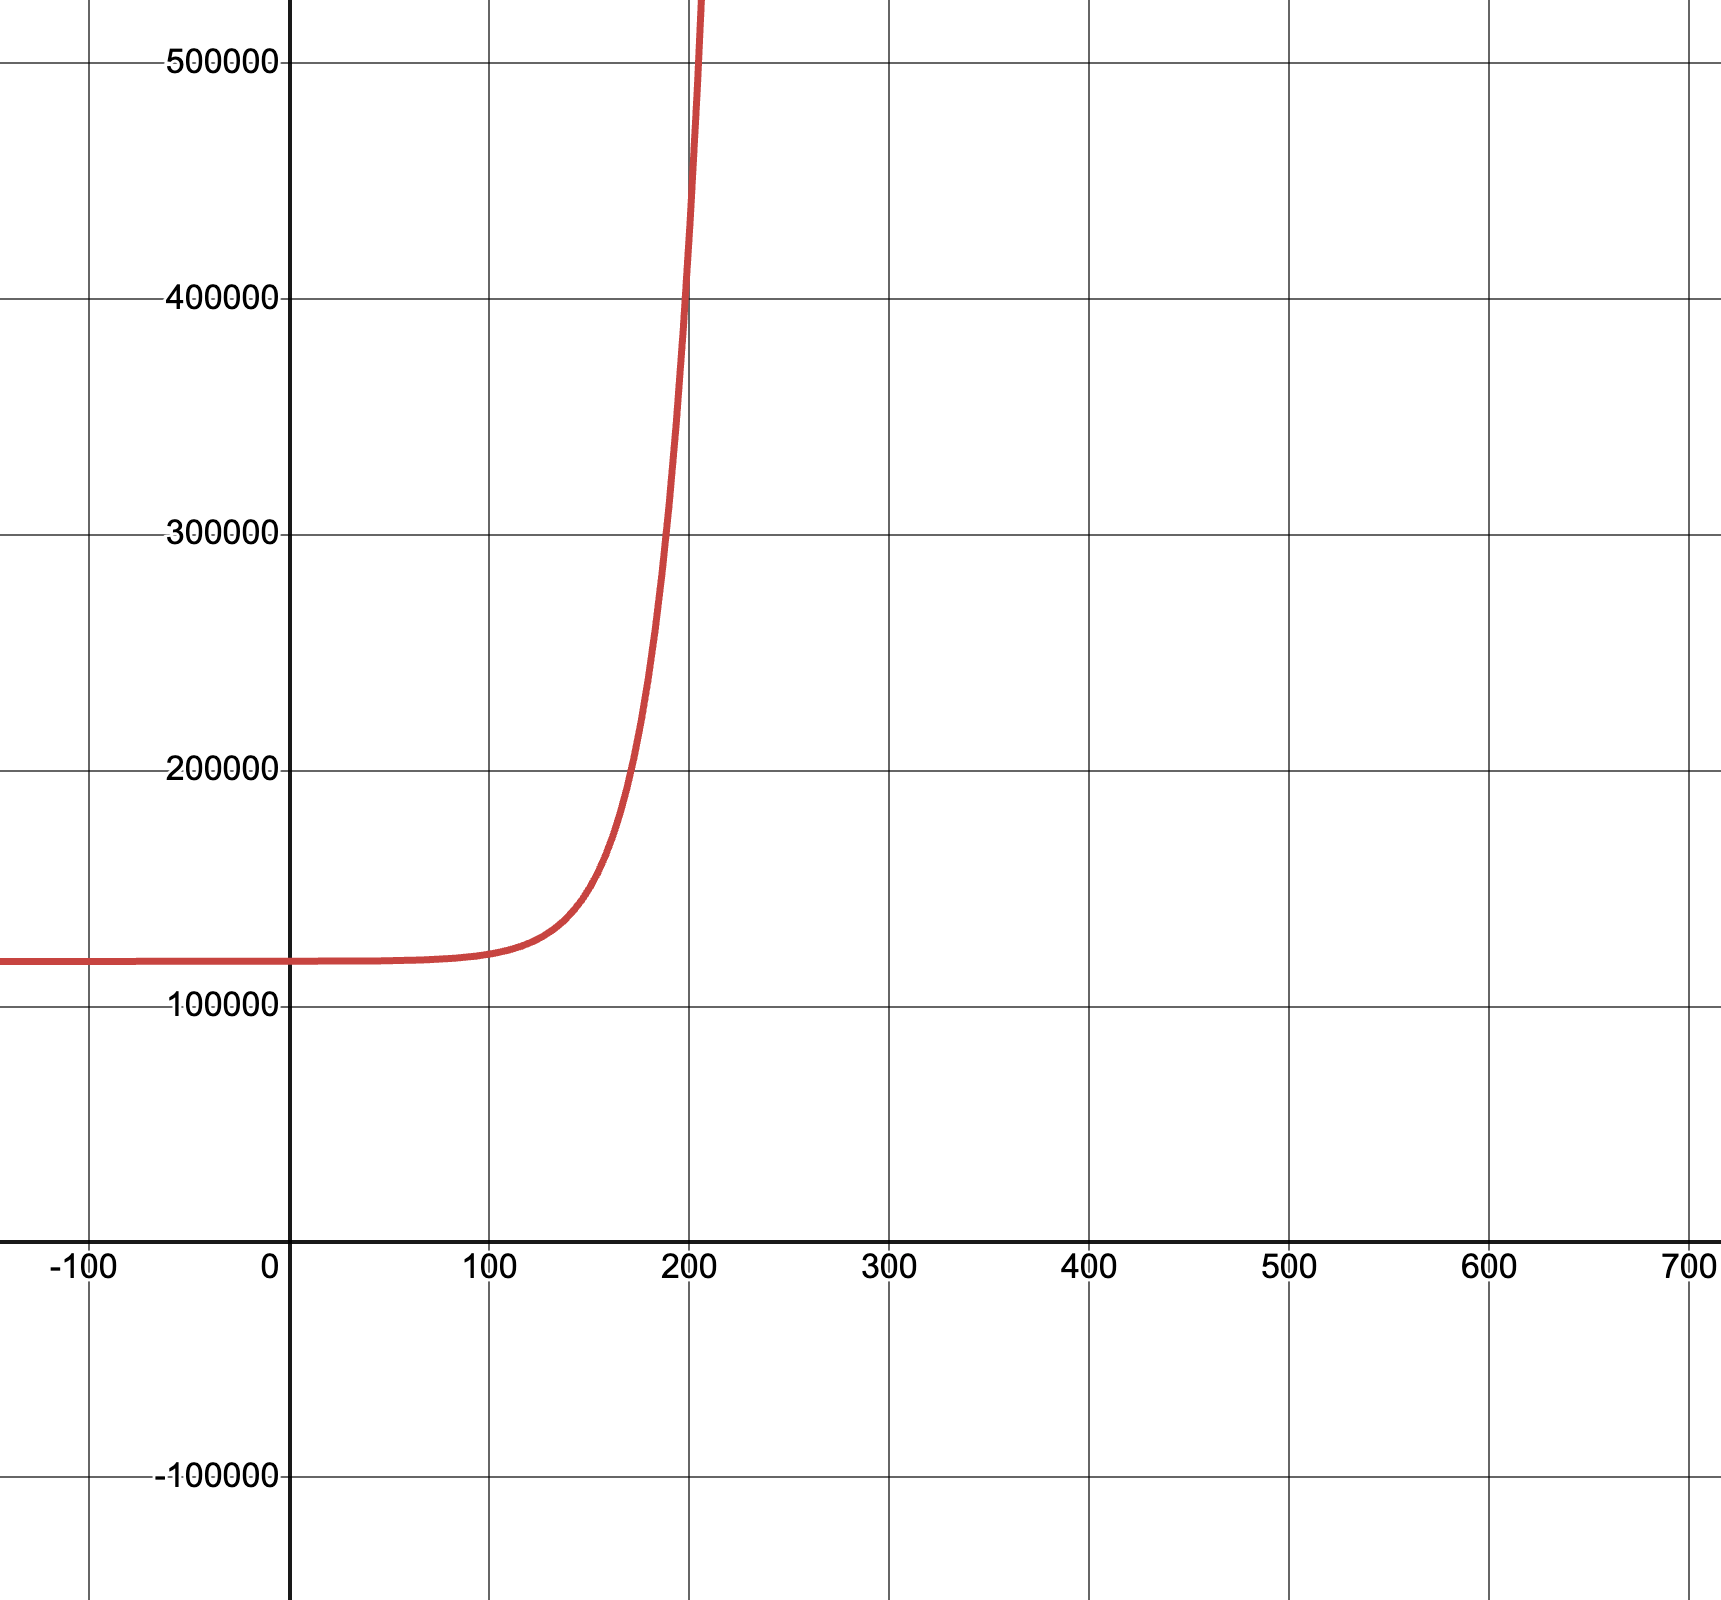 A graph showing the exponential rise in positive test cases in Massachusetts over time